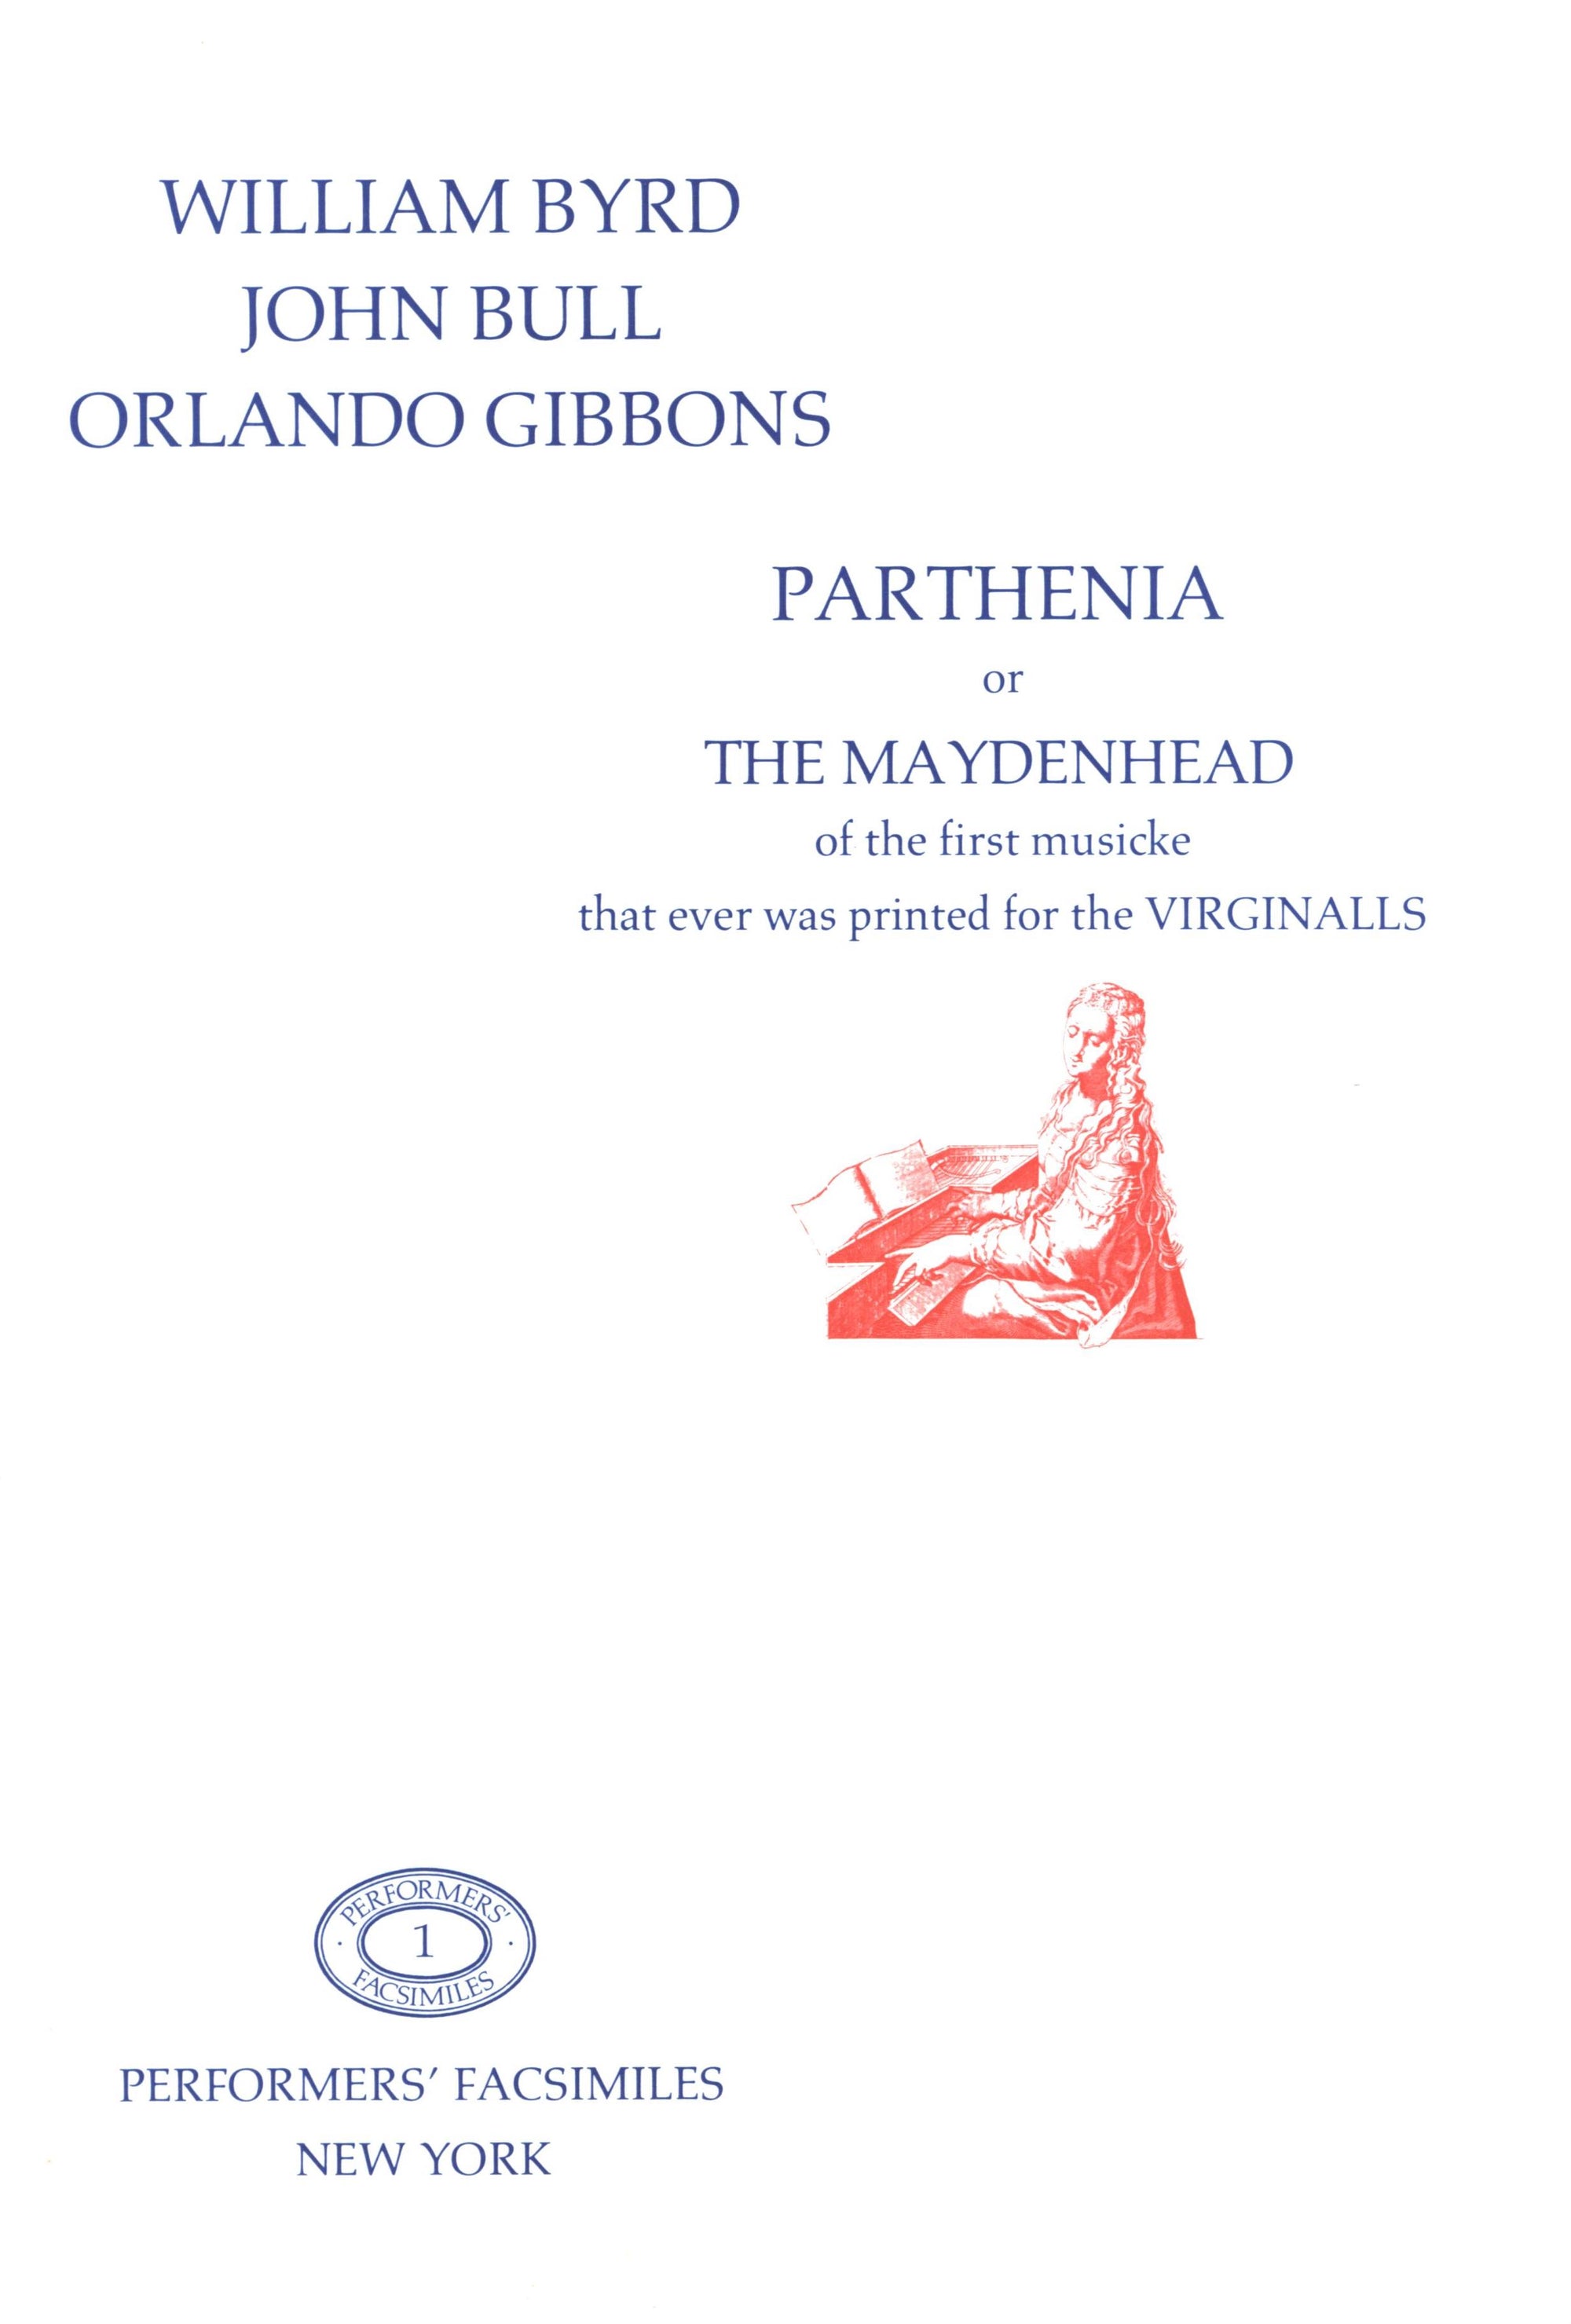 Parthenia: or the Maydenhead of the first musicke that ever was printed for the VIrginalls